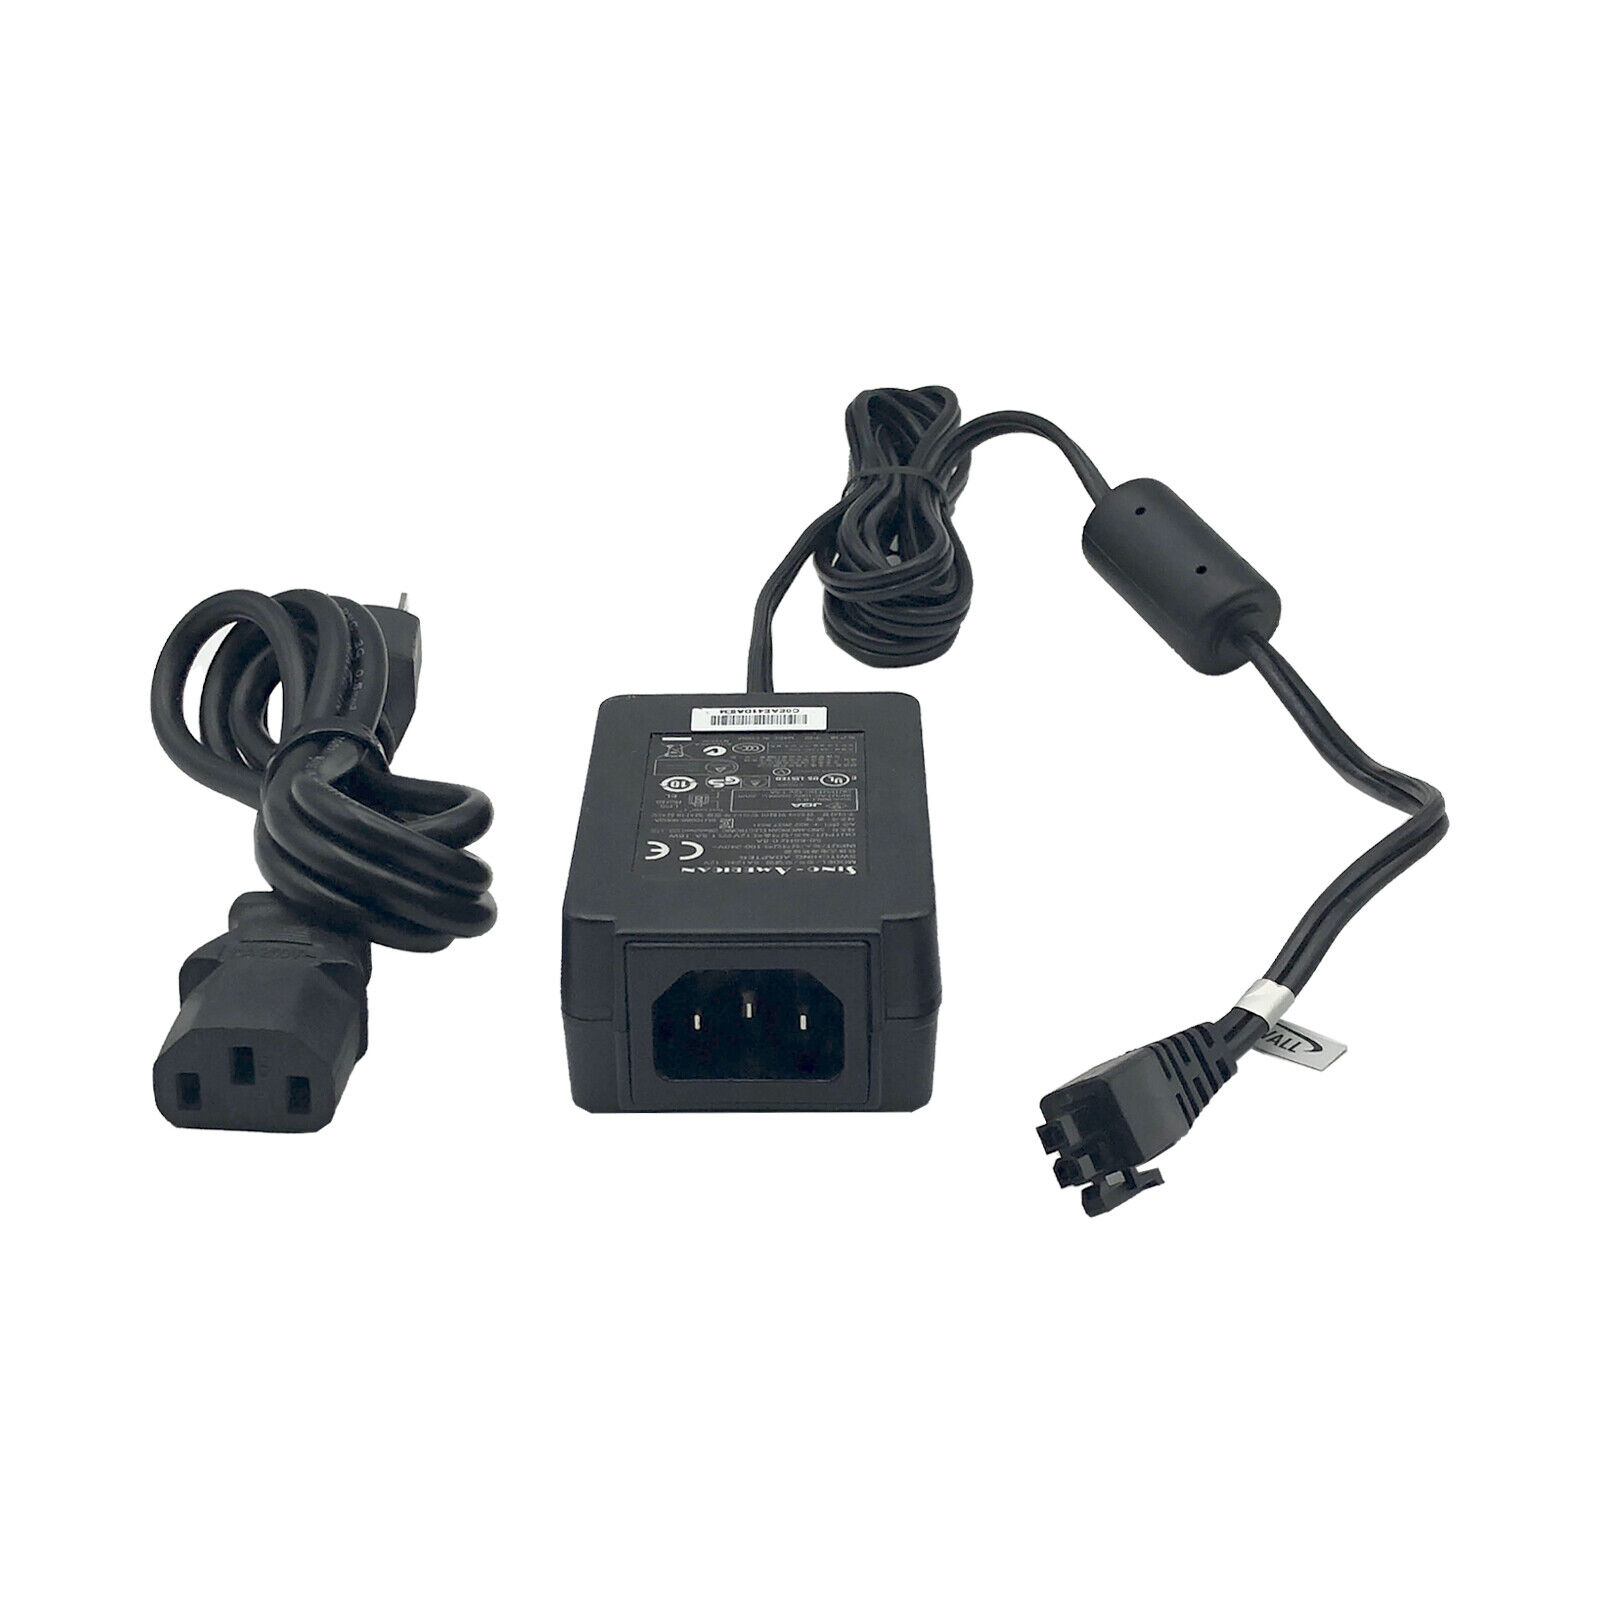 Genuine AC Power Supply Adapter for SonicWALL TZ 180 OEM W/P.Cord Brand: Sino-American Type: AC/DC Adapter Connectio